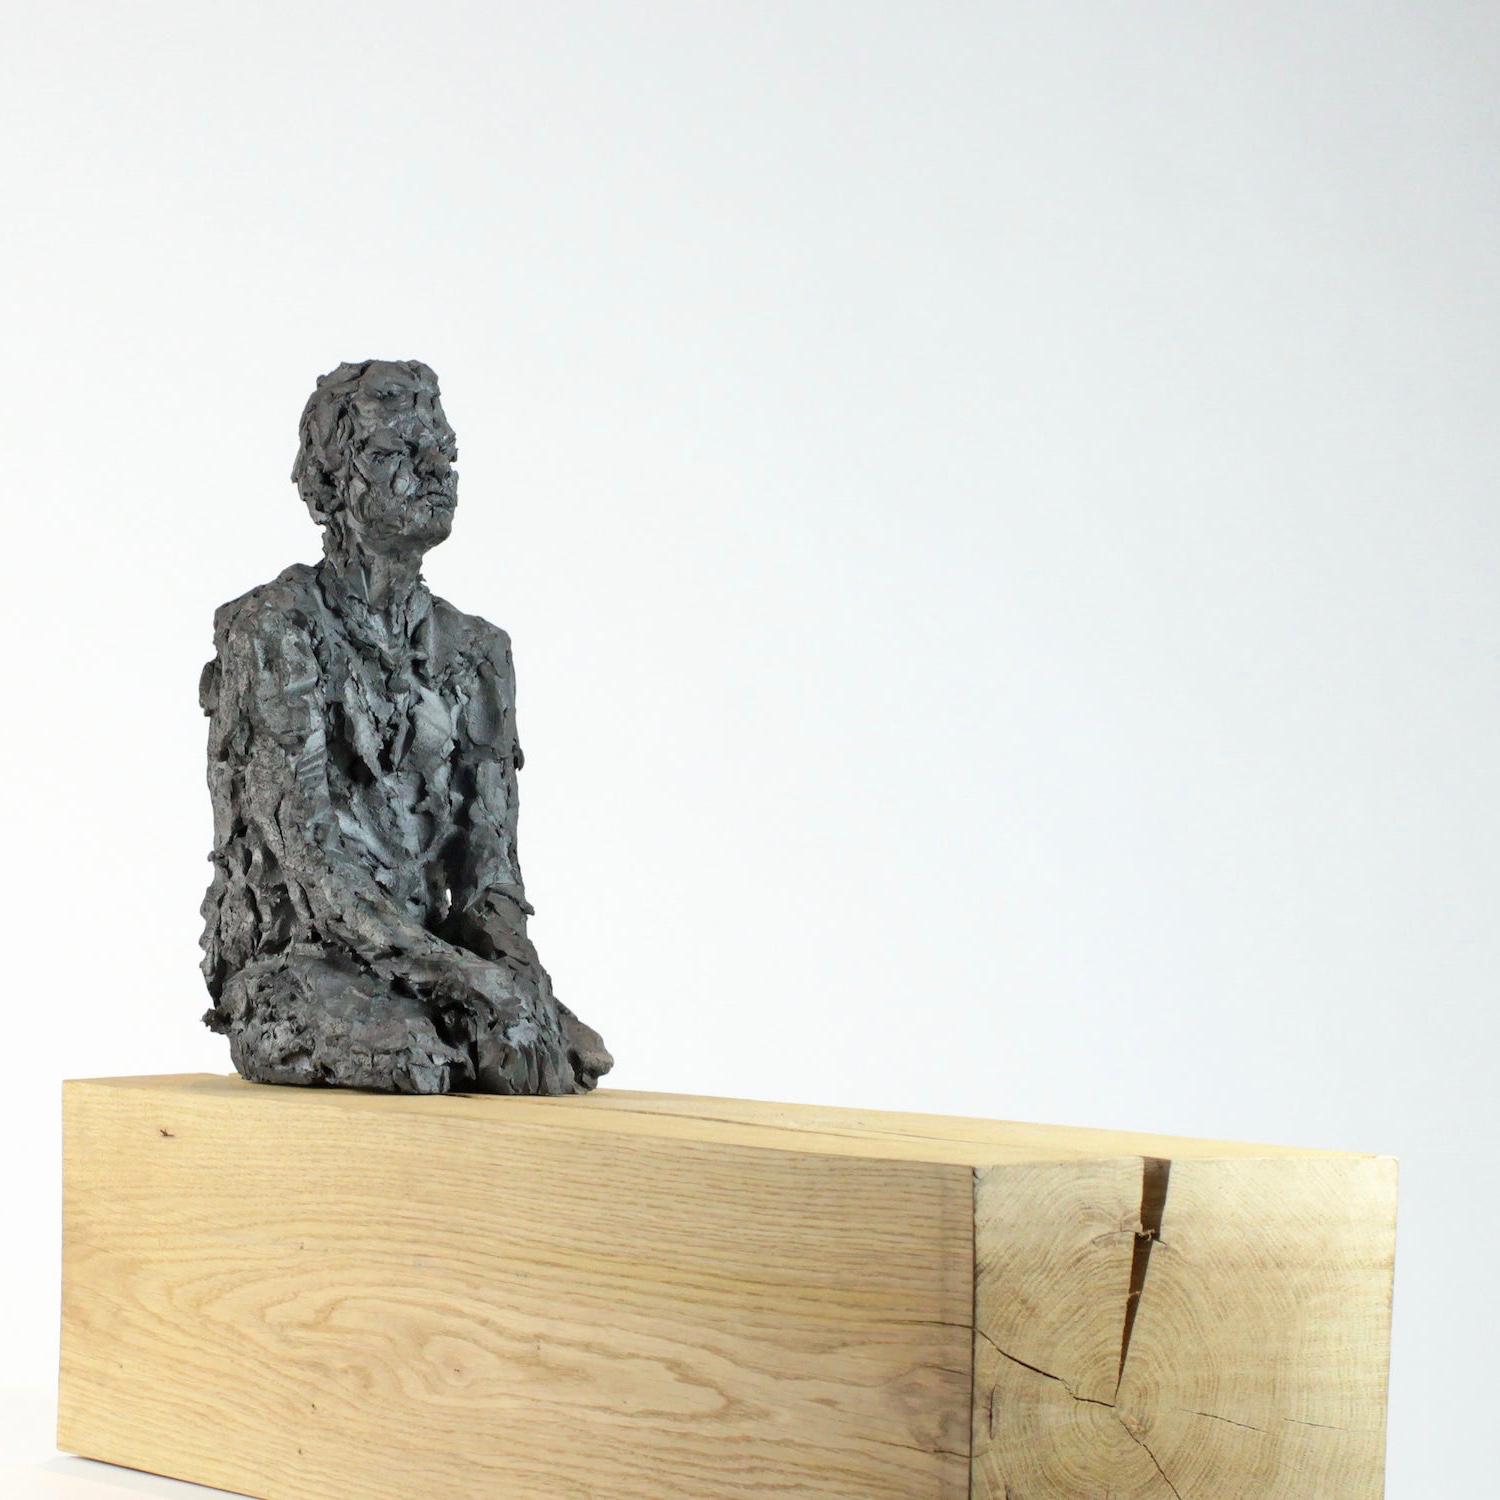 Vestibule des pommes (with Martin) is a unique smoke-fired stoneware sculpture by French contemporary artist Cécile Raynal, dimensions are 46 × 57 × 19 cm (18.1 × 22.4 × 7.5 in). Dimensions include wooden base (oak).
This sculpture is a unique piece